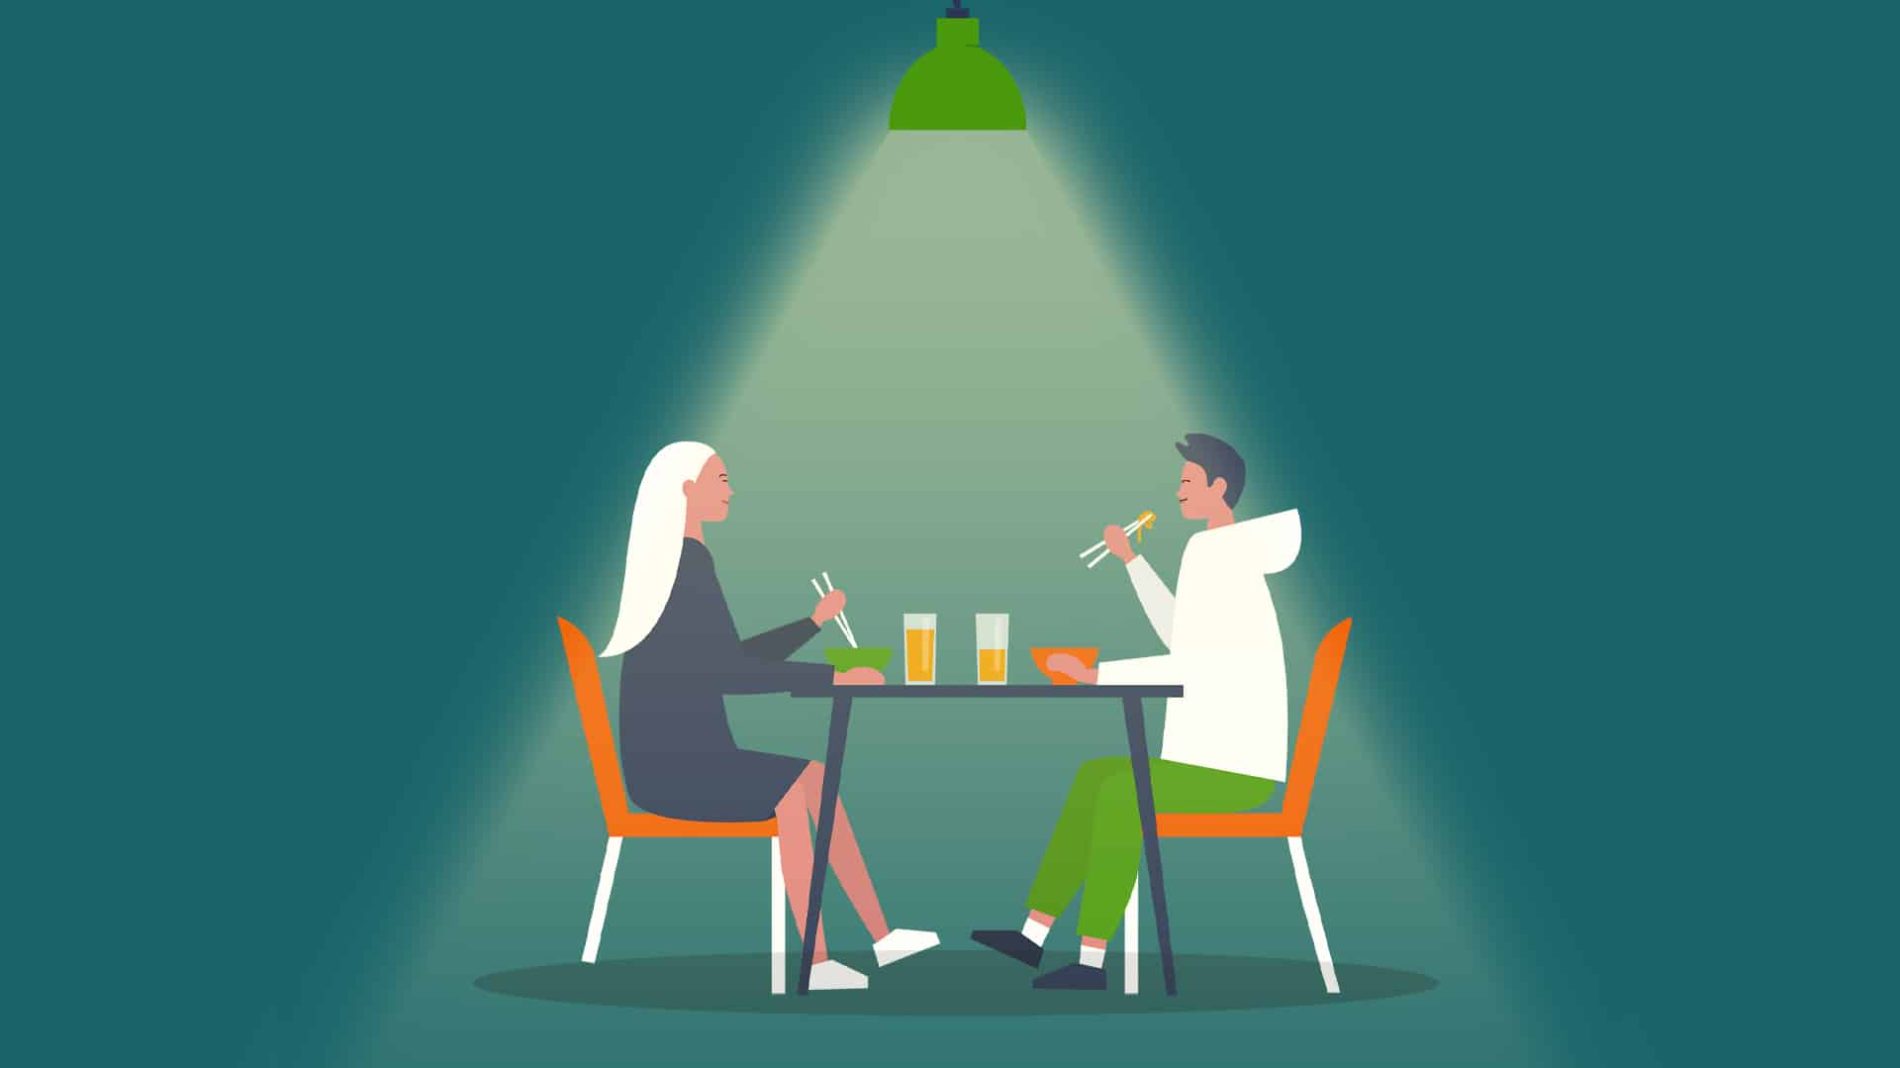 Illustration of two people sitting at a table having food and drinks together